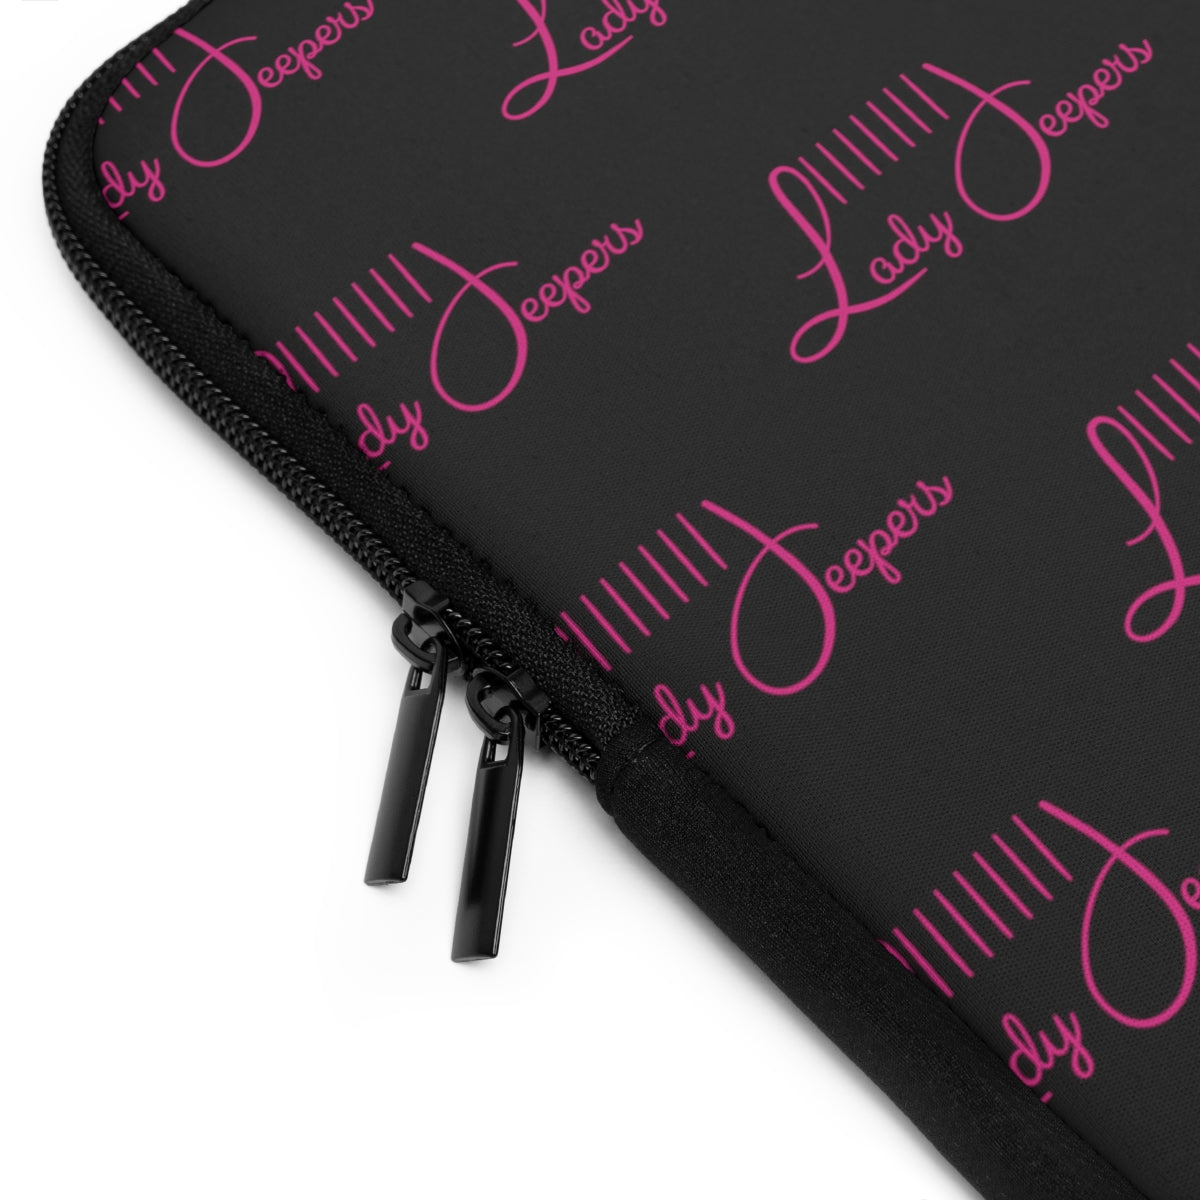 LadyJeepers.com Laptop Sleeve Black with Pink Logo Pattern